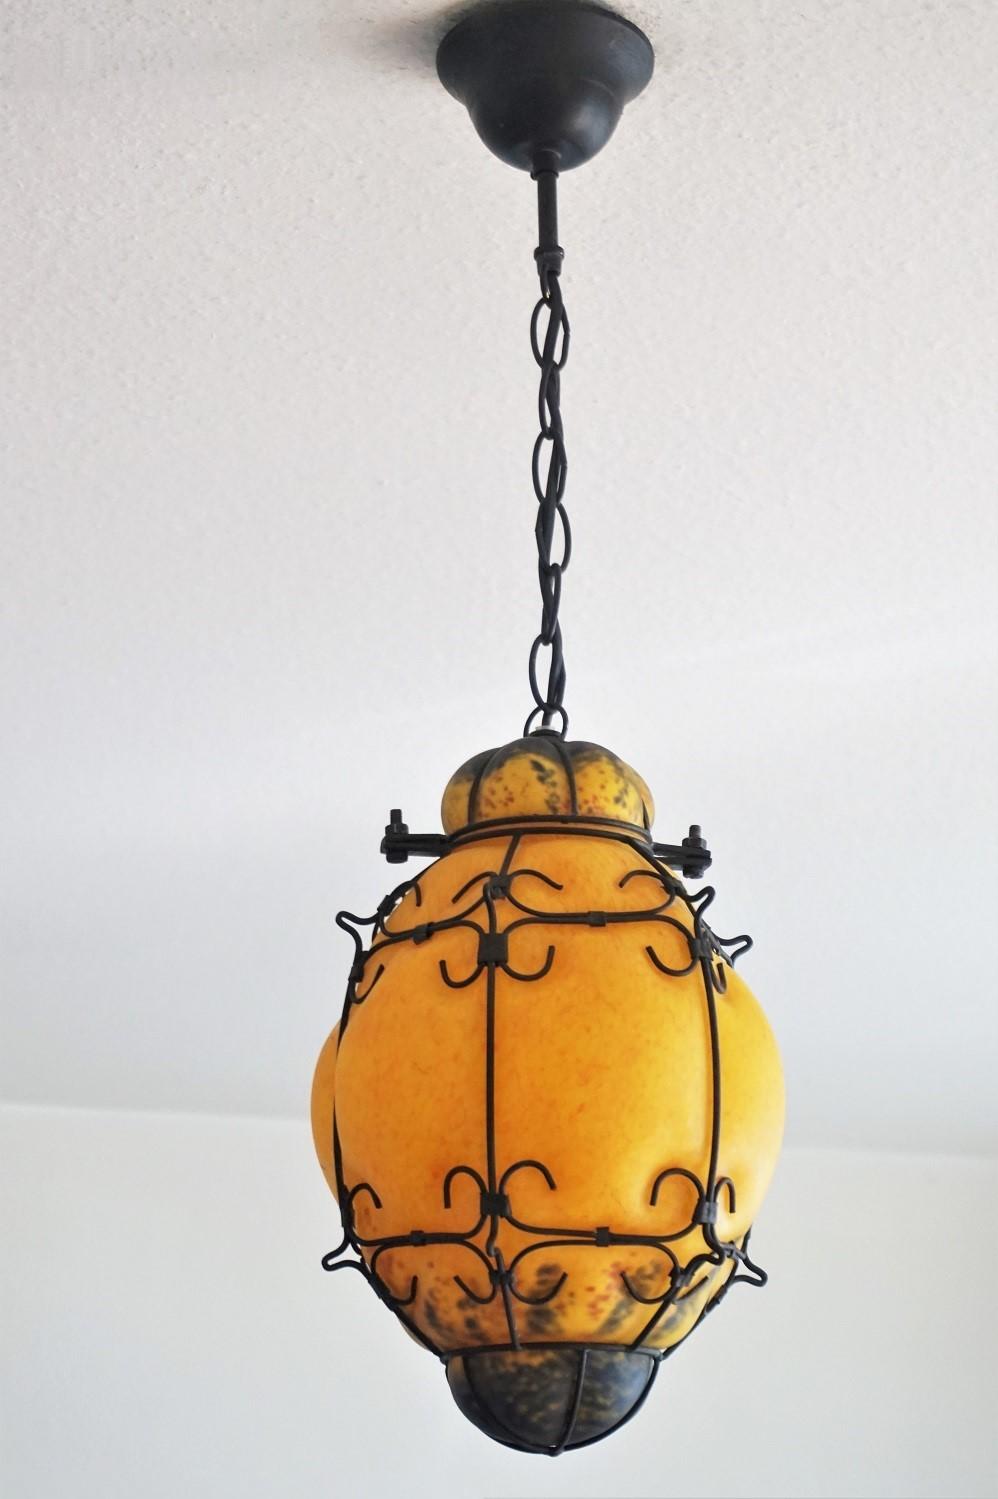 Art Deco Murano Handcrafted Colored Glass Wrought Iron Pendant or Lantern, Venice, Italy